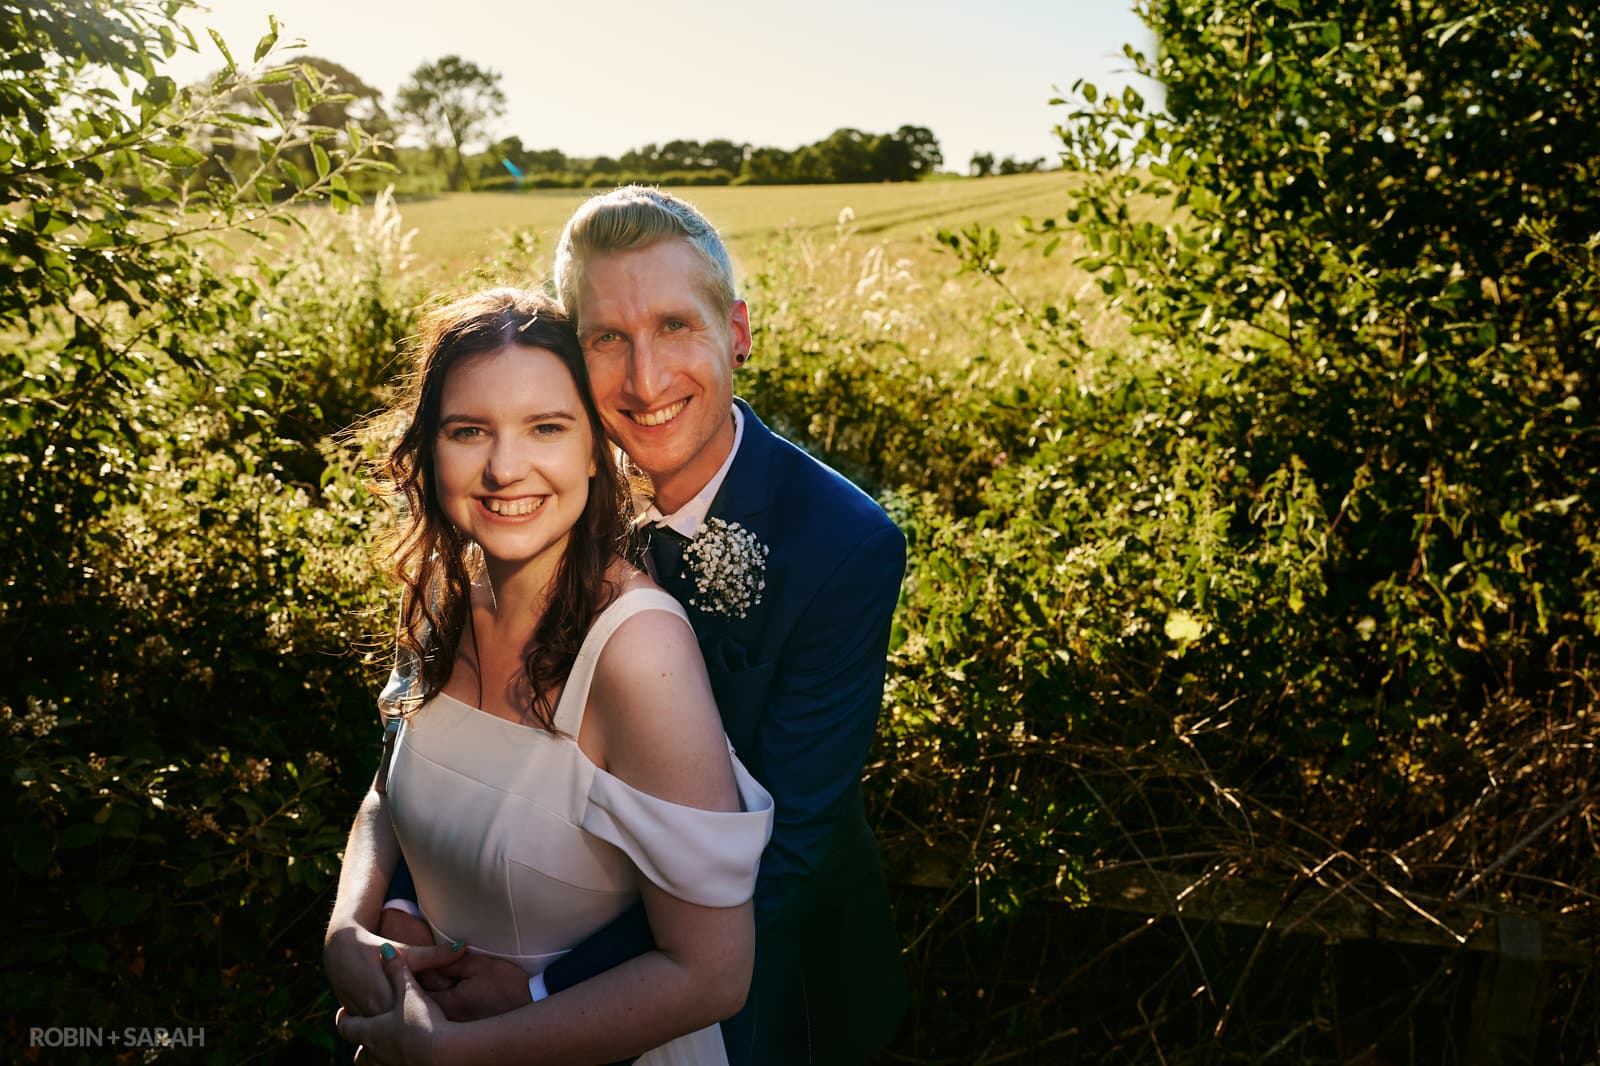 Bride and groom surrounded by trees and shrubs with crop field in background